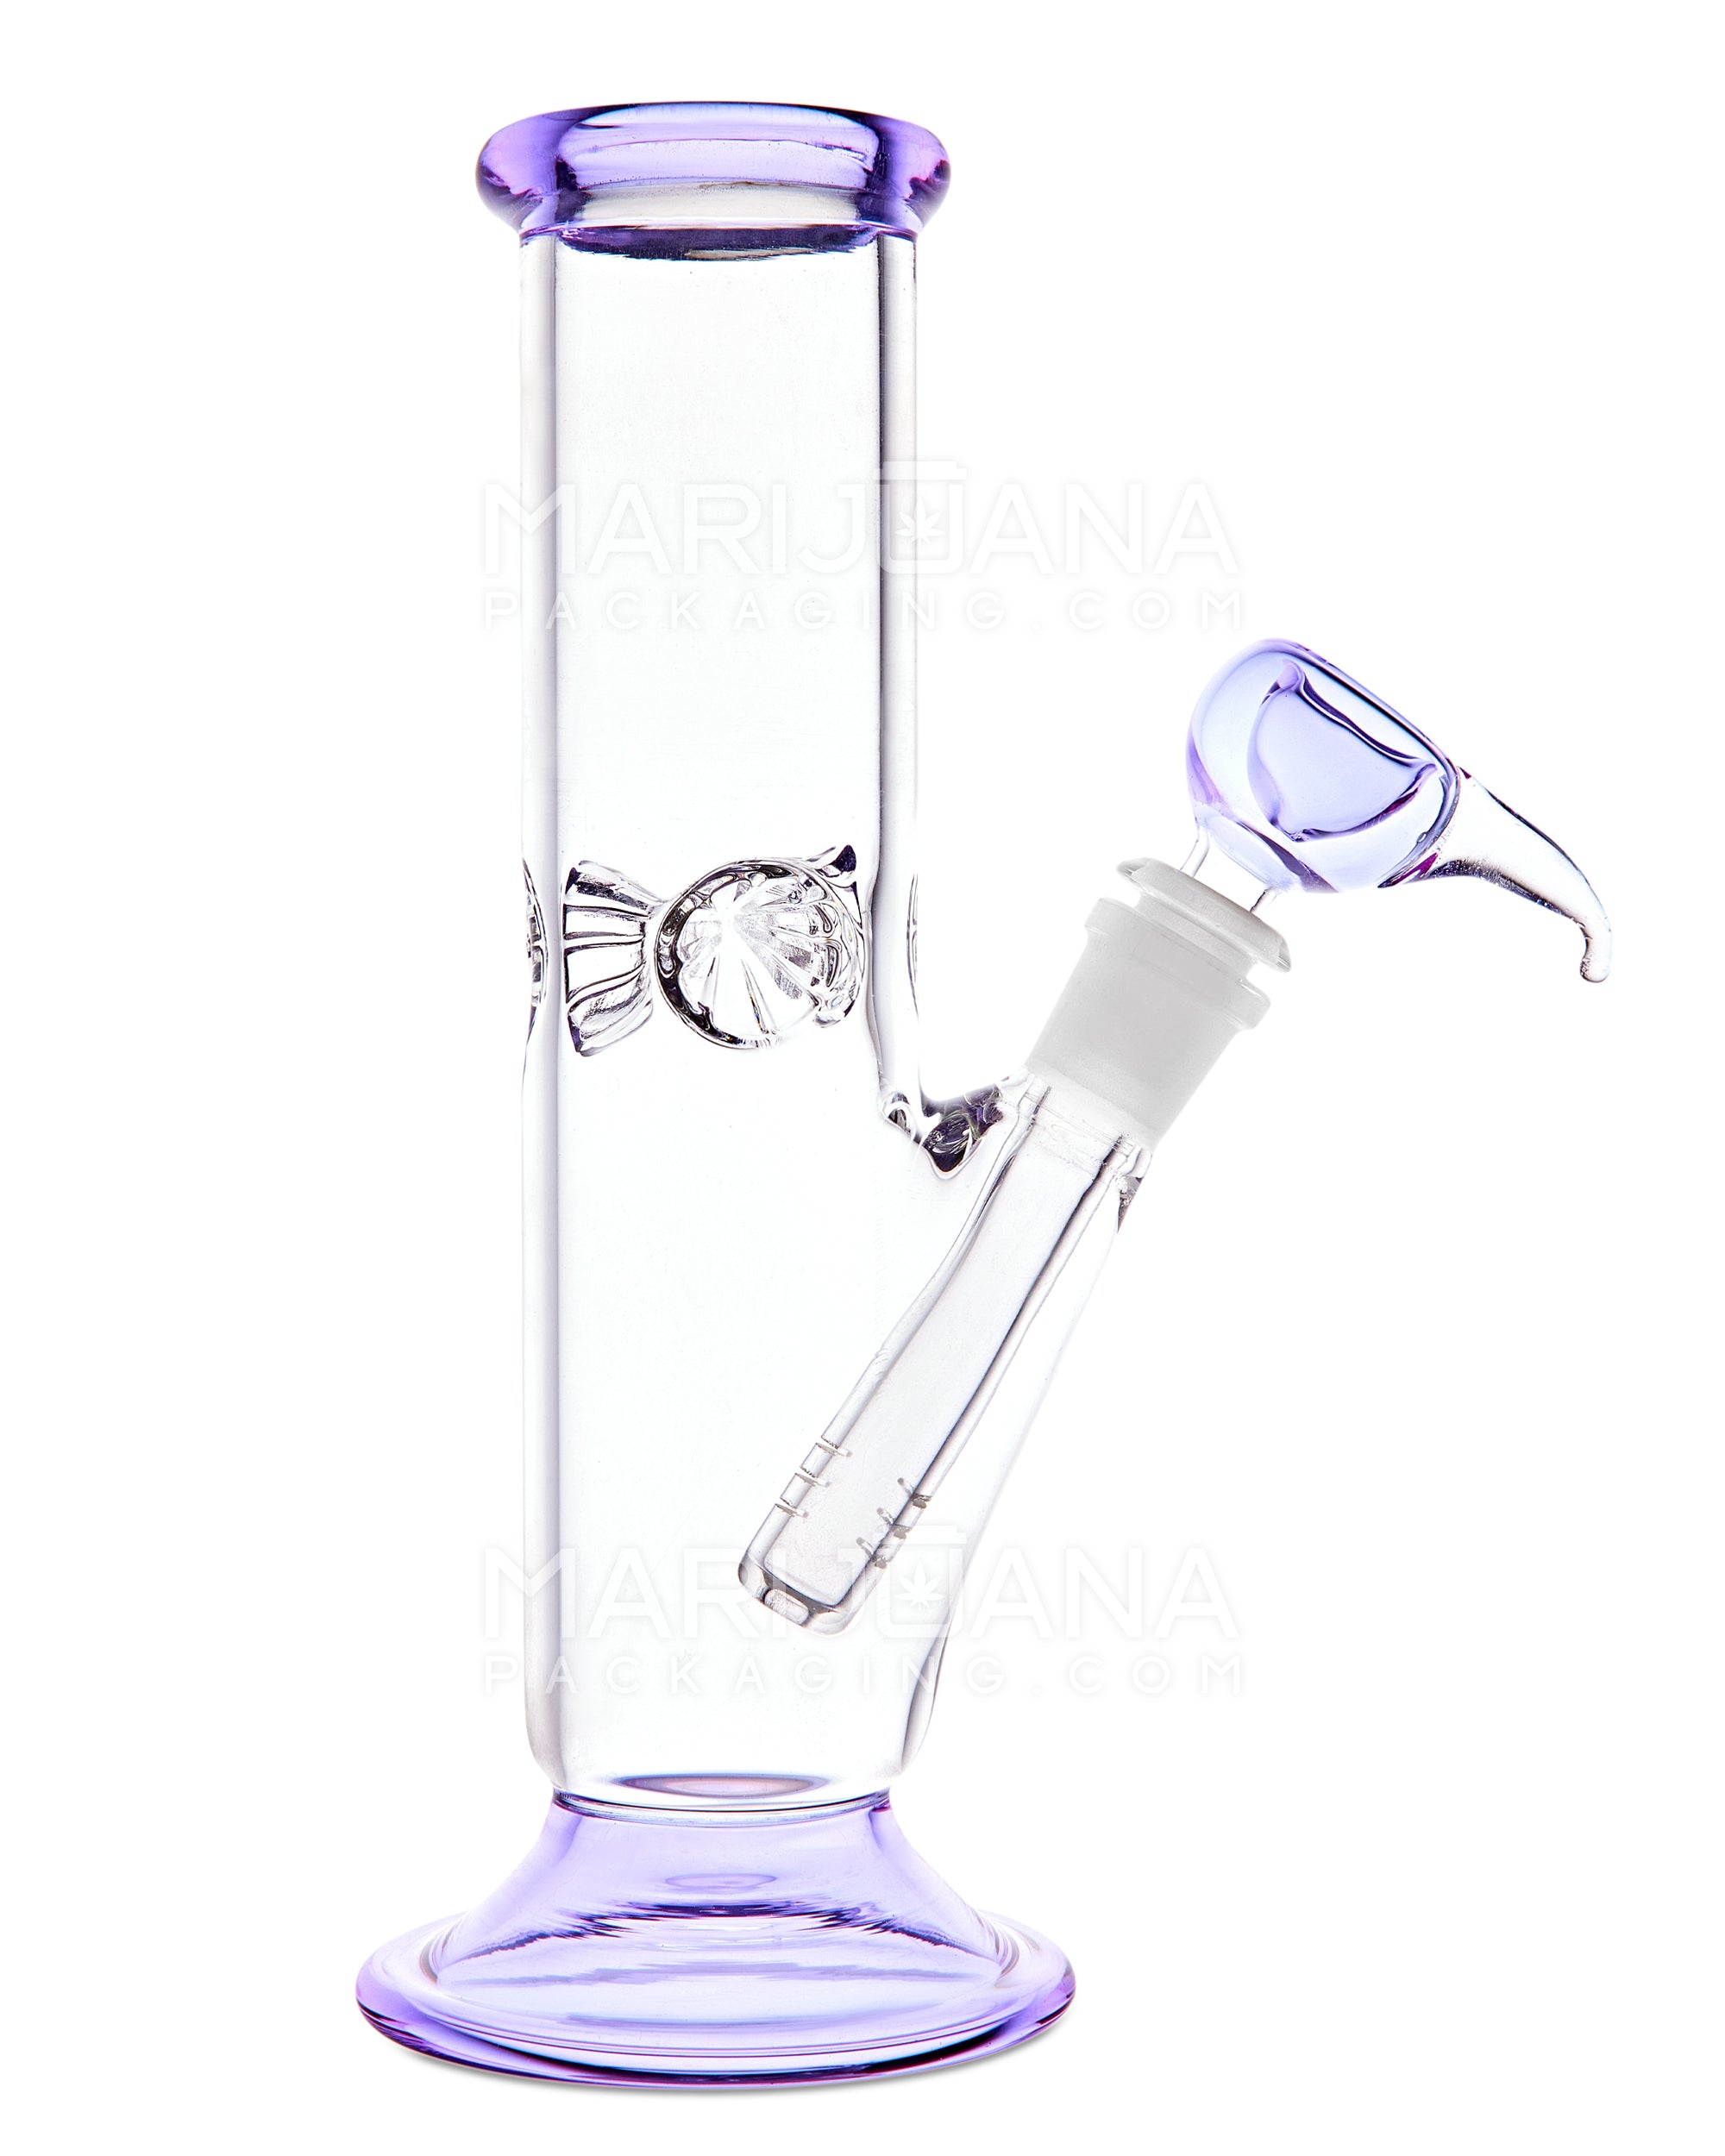 USA Glass | Straight Glass Water Pipe w/ Ice Catcher | 9in Tall - 14mm Bowl - Light Blue - 1